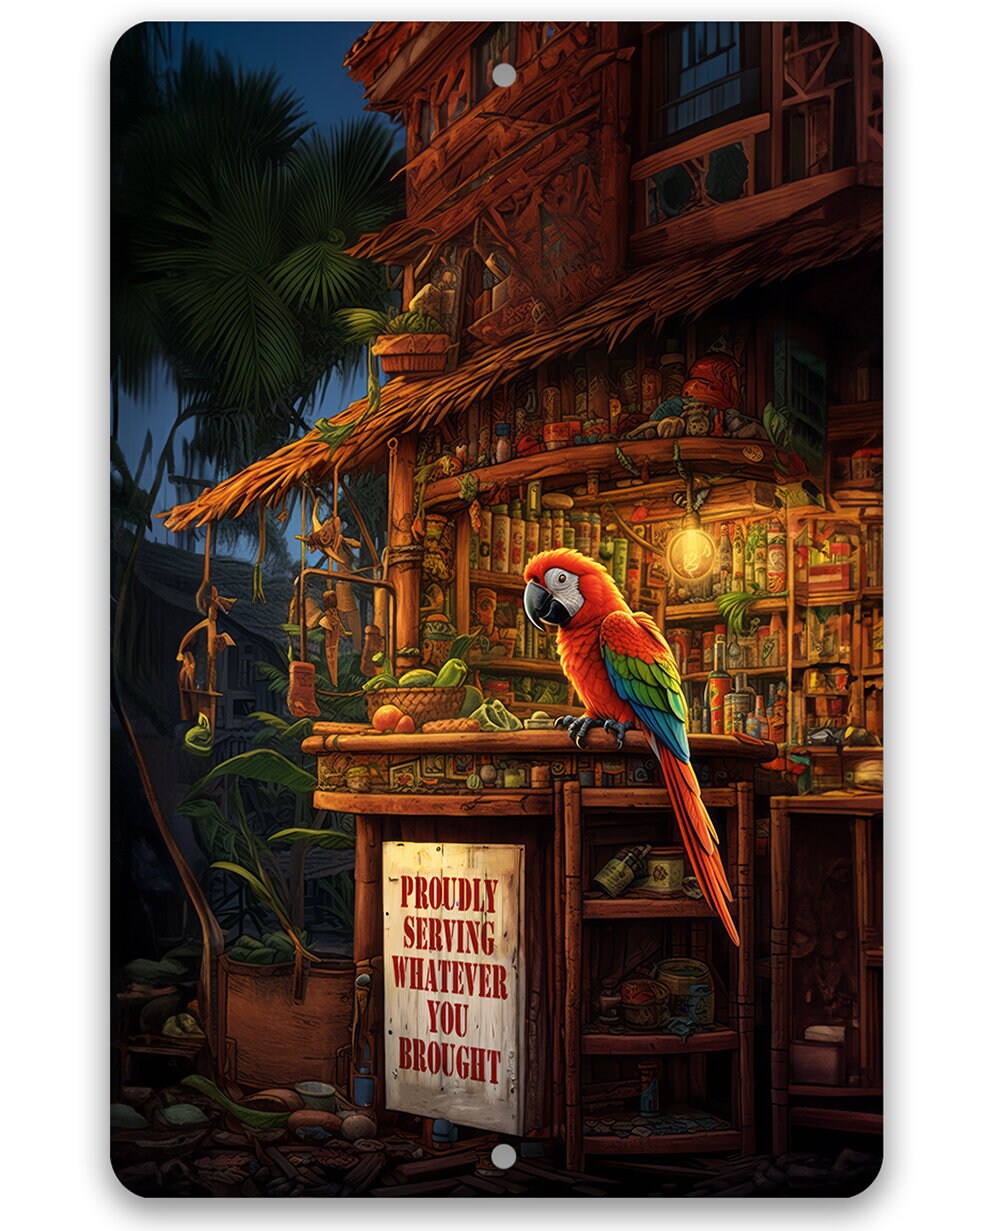 Tin - Tiki Parrot Bars - Durable 8"x12" or 12"x18" Metal Signs - Indoor or Outdoor - Makes a Great Gift and Funny Decor